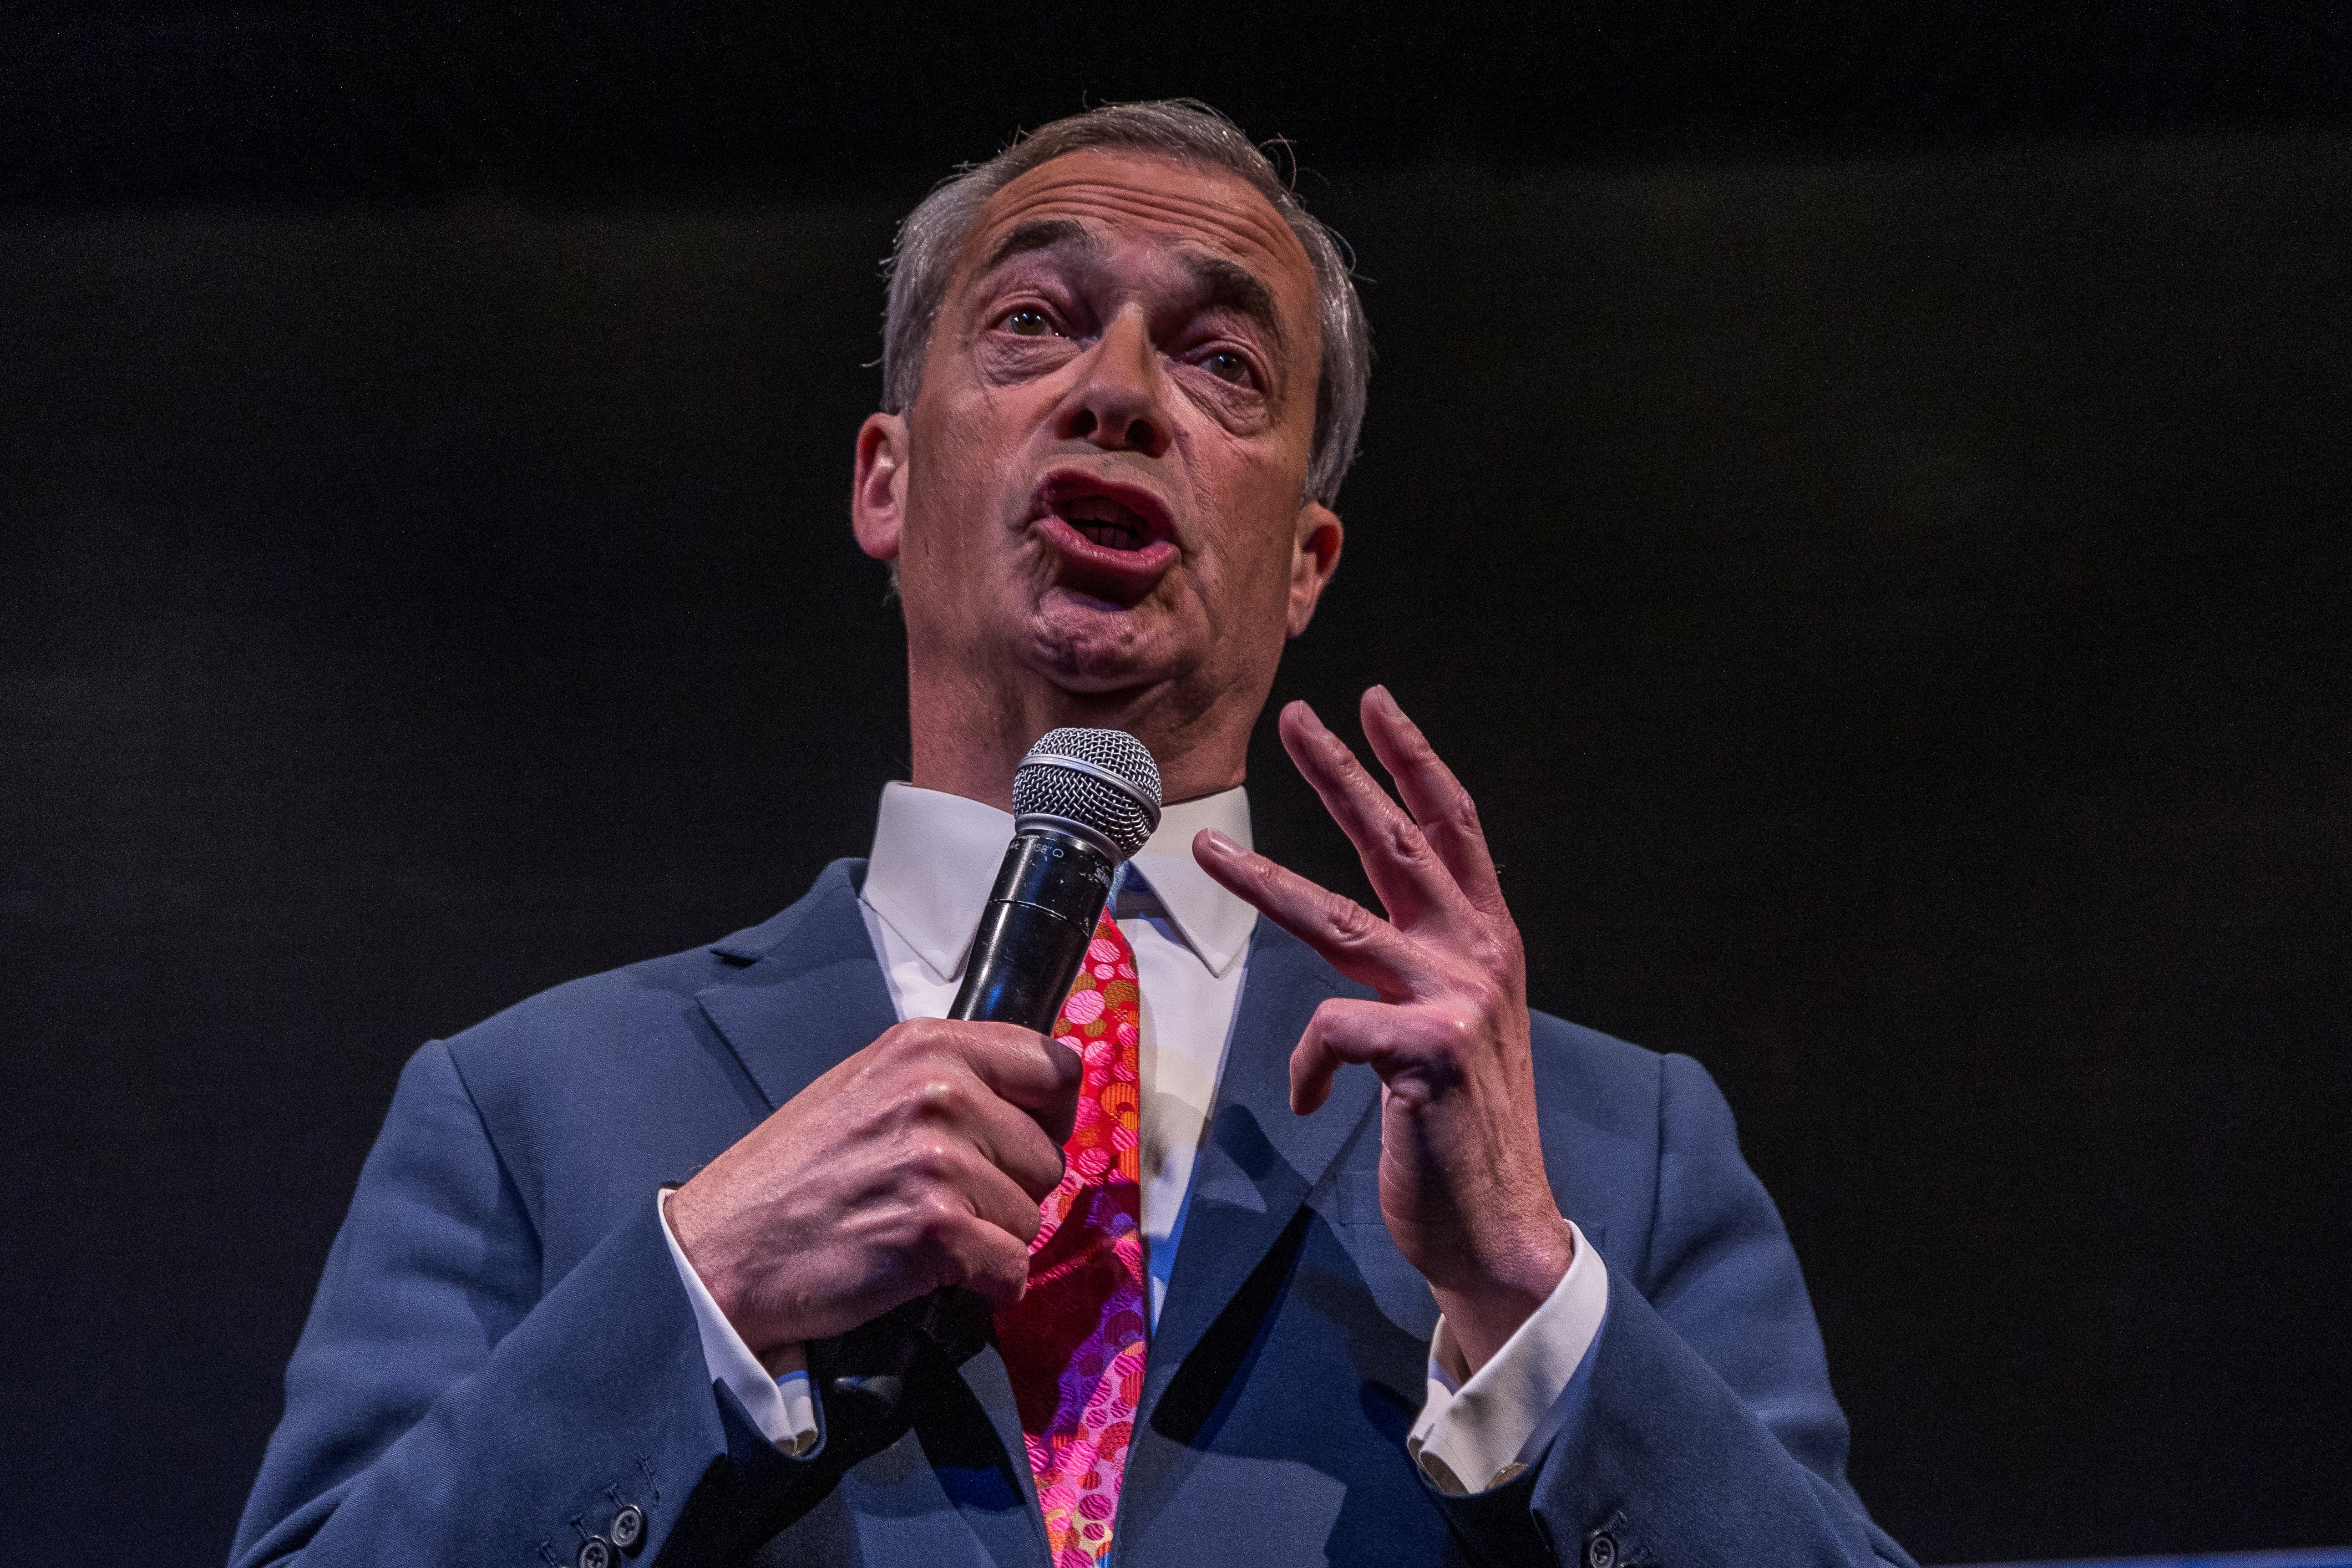 Some have suggested that a Nigel Farage candidacy could give the Reform party a seat during a general election